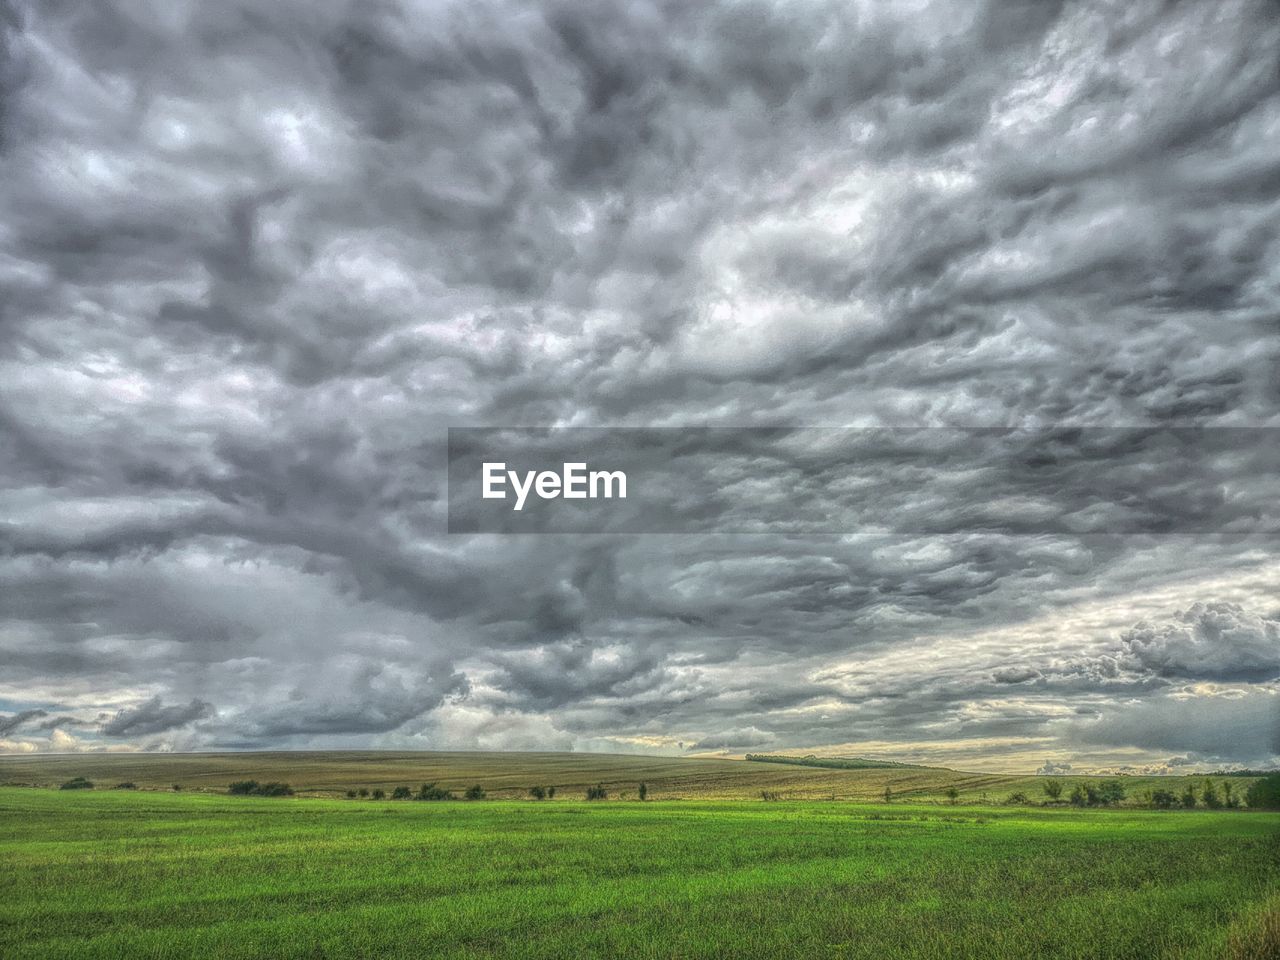 cloud, environment, landscape, sky, storm, beauty in nature, plain, land, scenics - nature, nature, field, grassland, storm cloud, plant, dramatic sky, rural scene, thunderstorm, no people, agriculture, grass, prairie, cloudscape, overcast, horizon, green, outdoors, rain, tranquility, wet, horizon over land, day, crop, tranquil scene, non-urban scene, extreme weather, farm